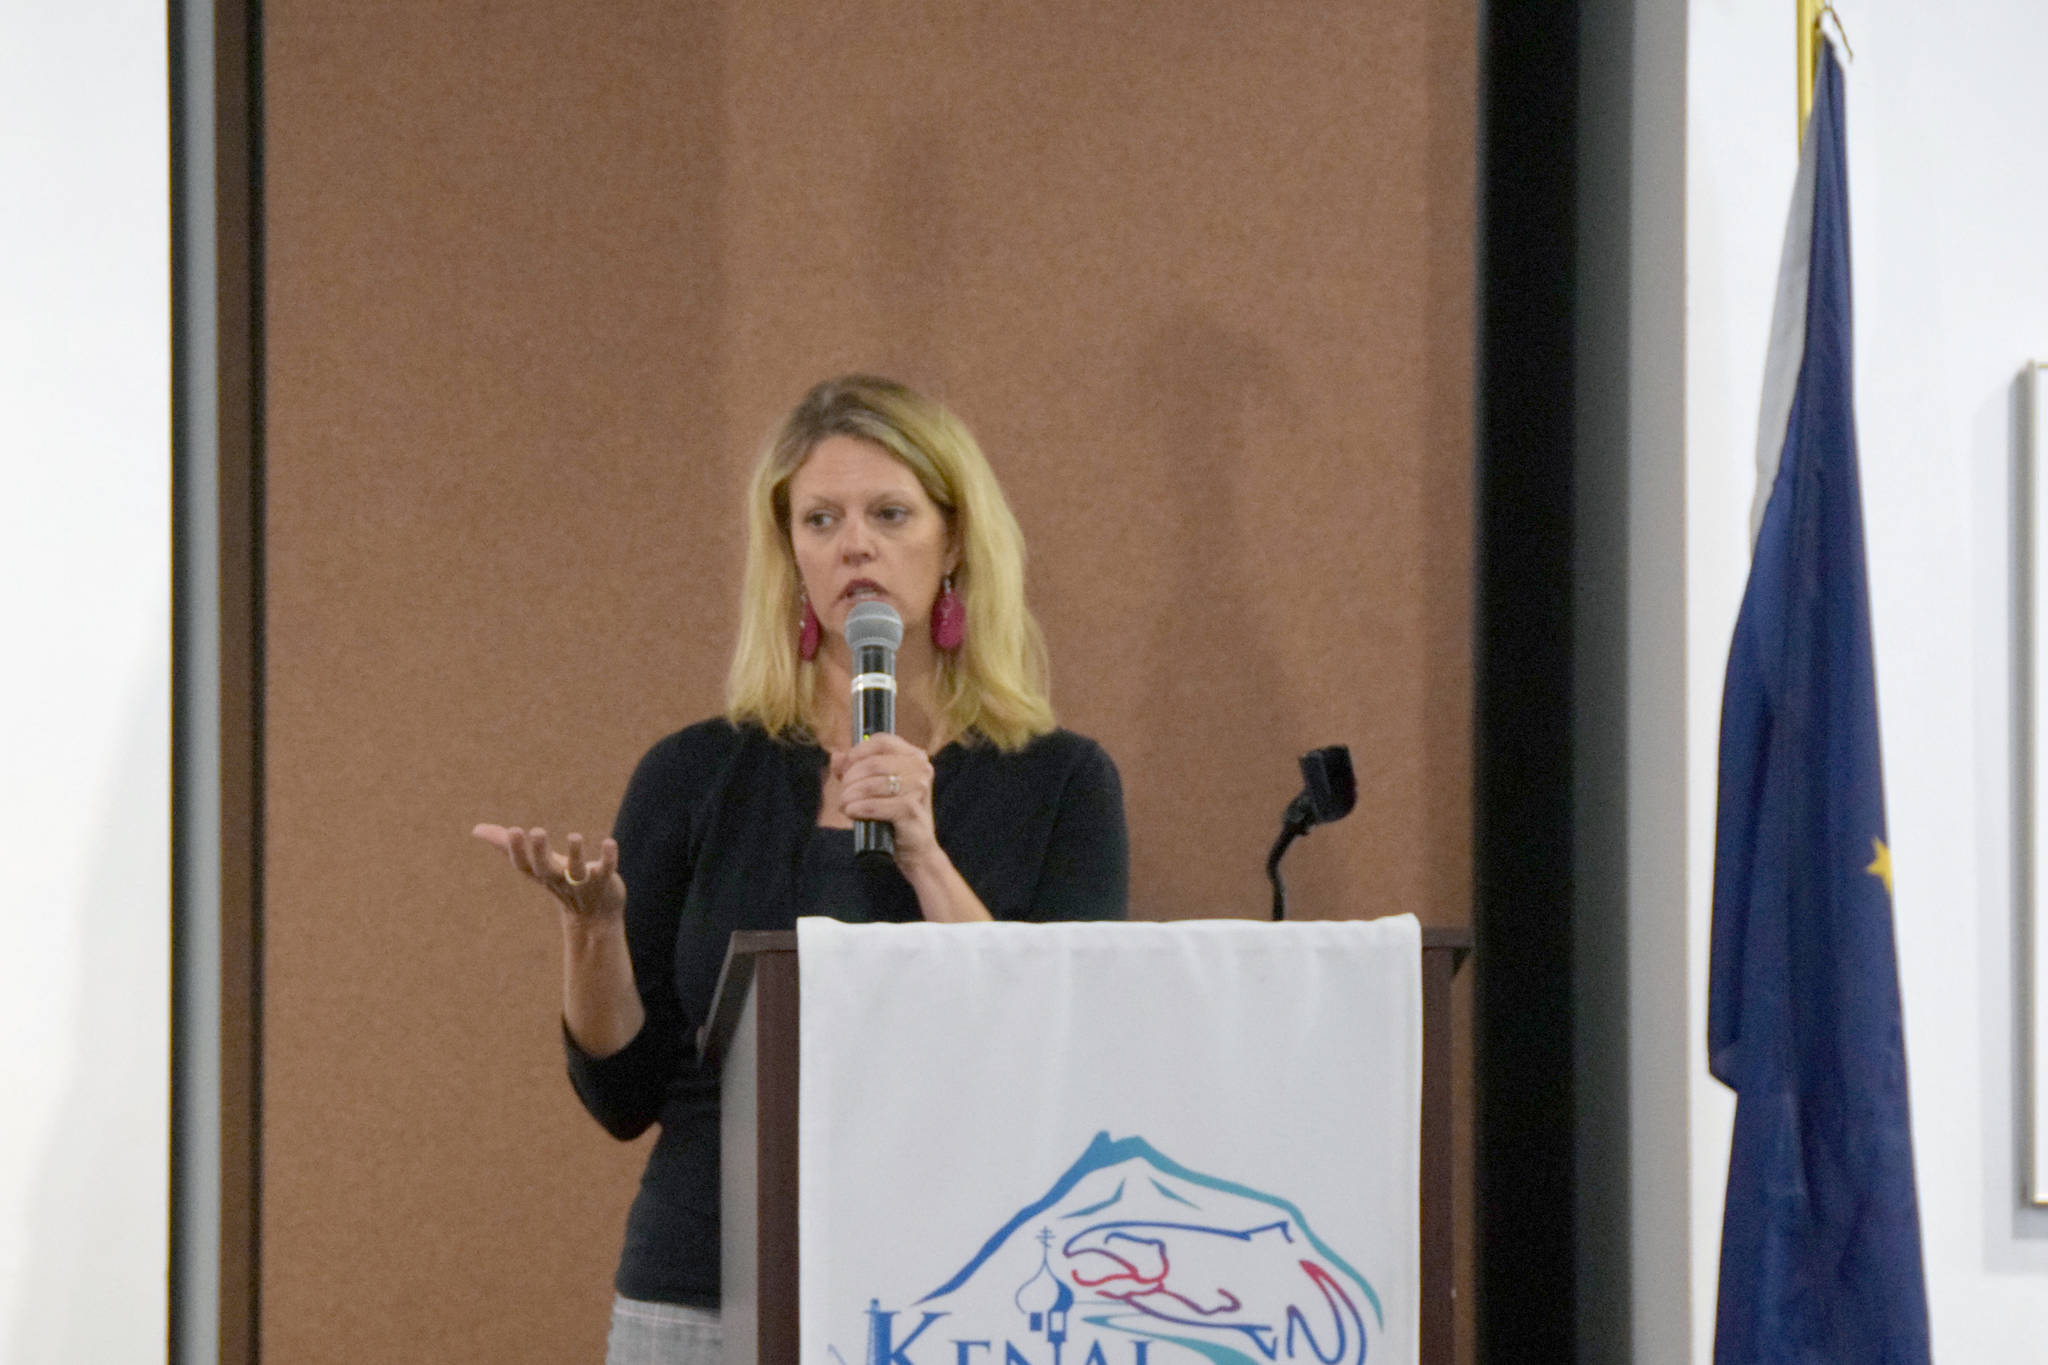 Kara Moriarty, President and CEO of the Alaska Oil and Gas Association, gives a presentation to the joint Kenai and Soldotna Chambers of Commerce at the Kenai Visitors Center in Kenai, Alaska on Wednesday, Aug. 21, 2019. (Photo by Brian Mazurek/Peninsula Clarion)